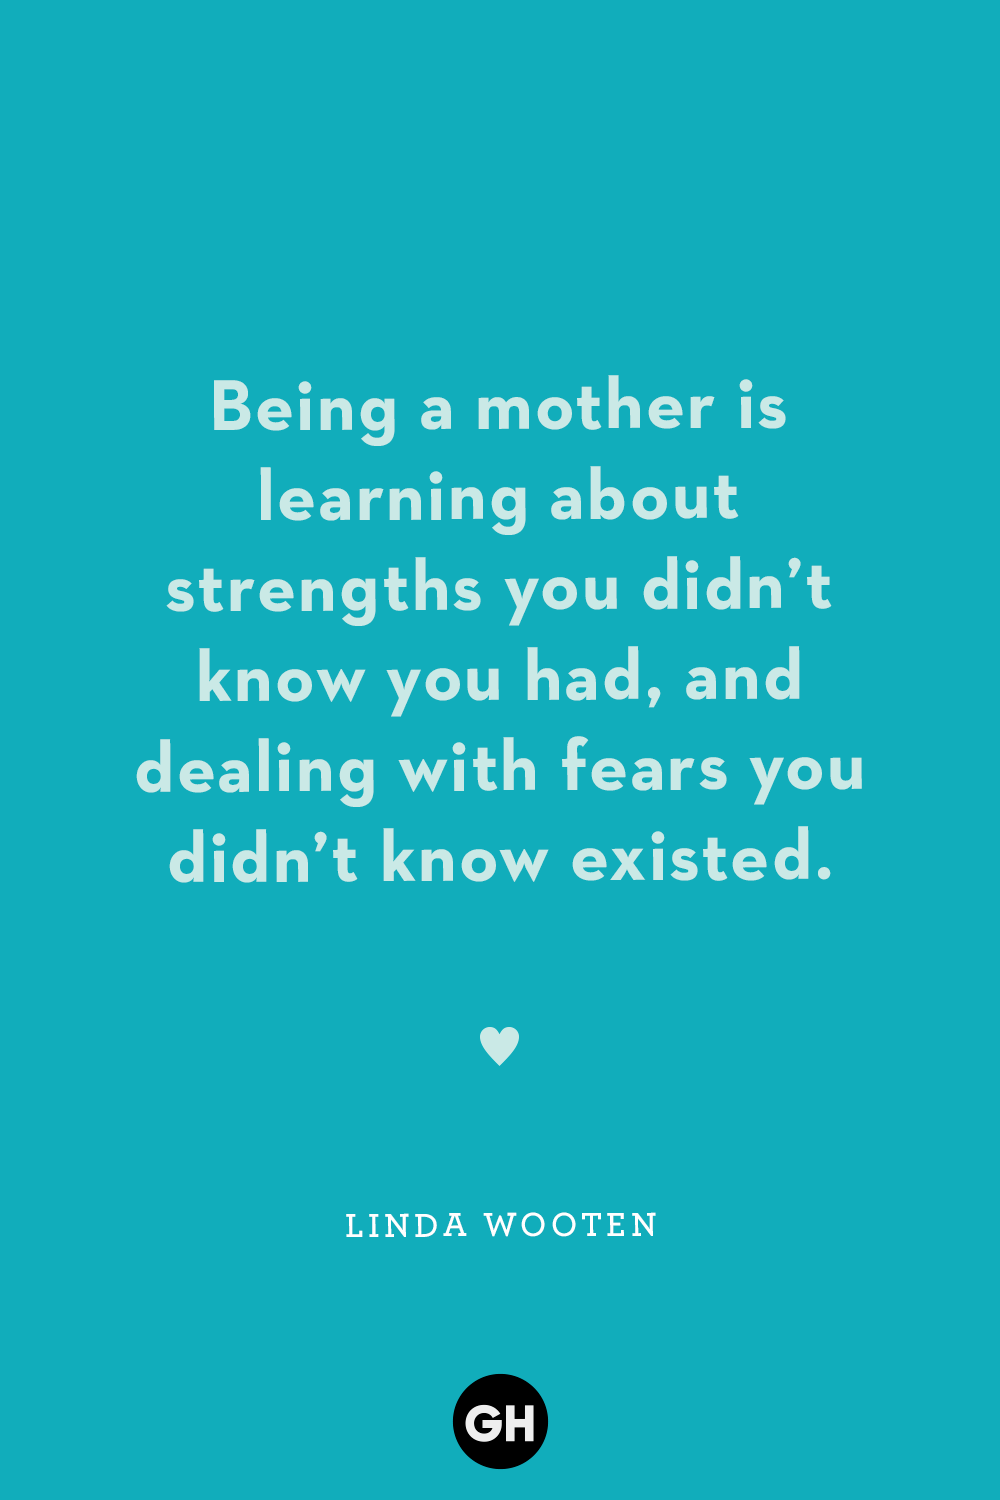 Being A Mother Quotes - KibrisPDR